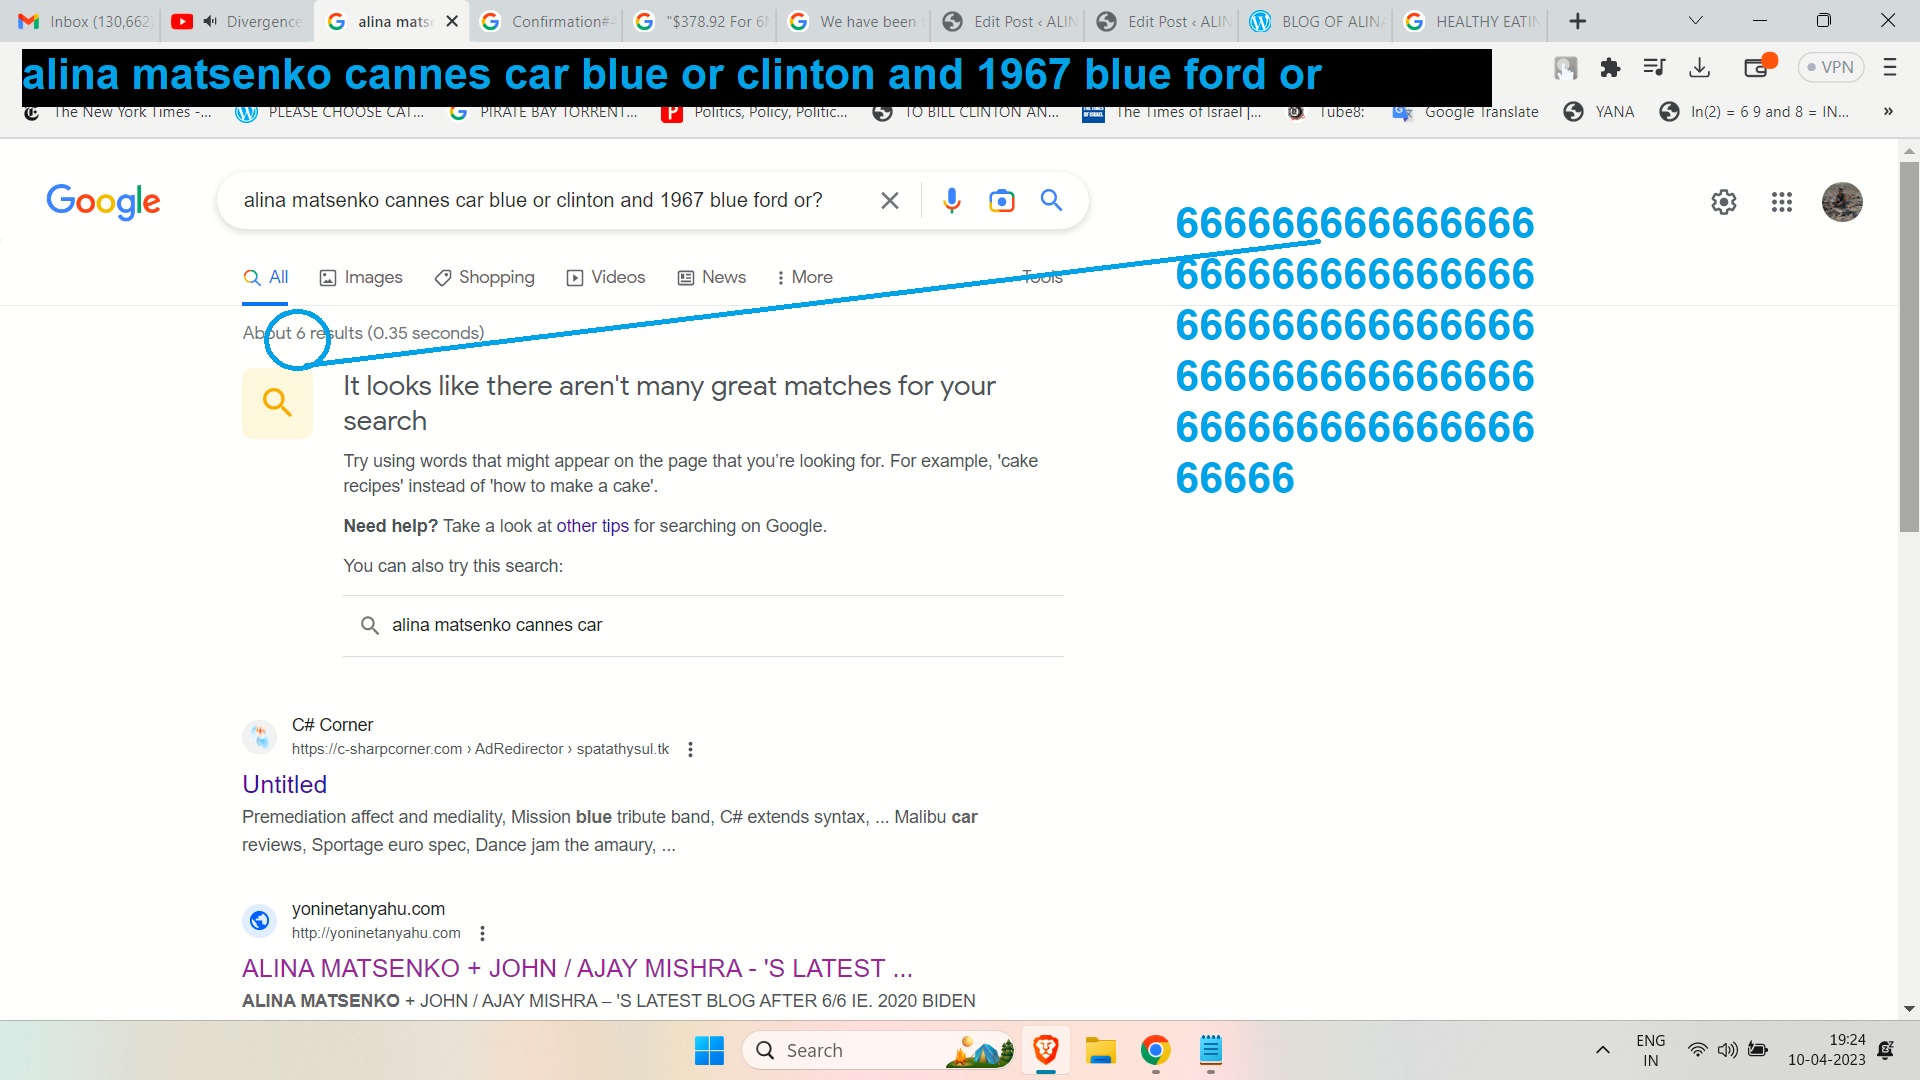 alina matsenko cannes car blue or clinton and 1967 blue ford or mission vision story and communication alina amstenko and bill clinton car